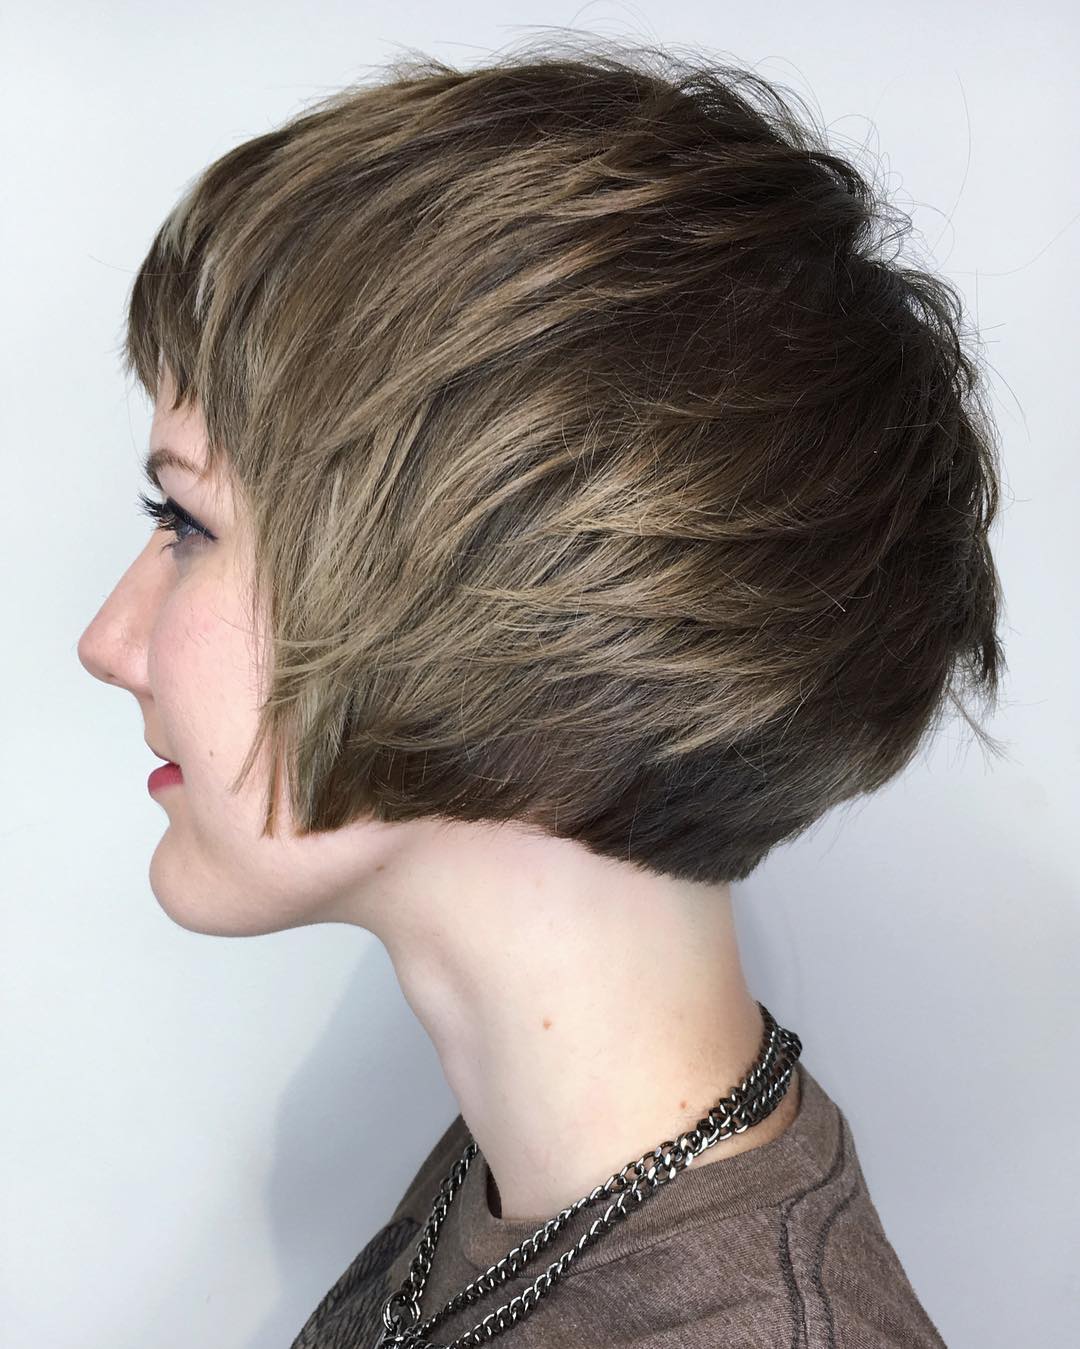 Short Straight Hairstyle - Short Haircuts for Women and Girls